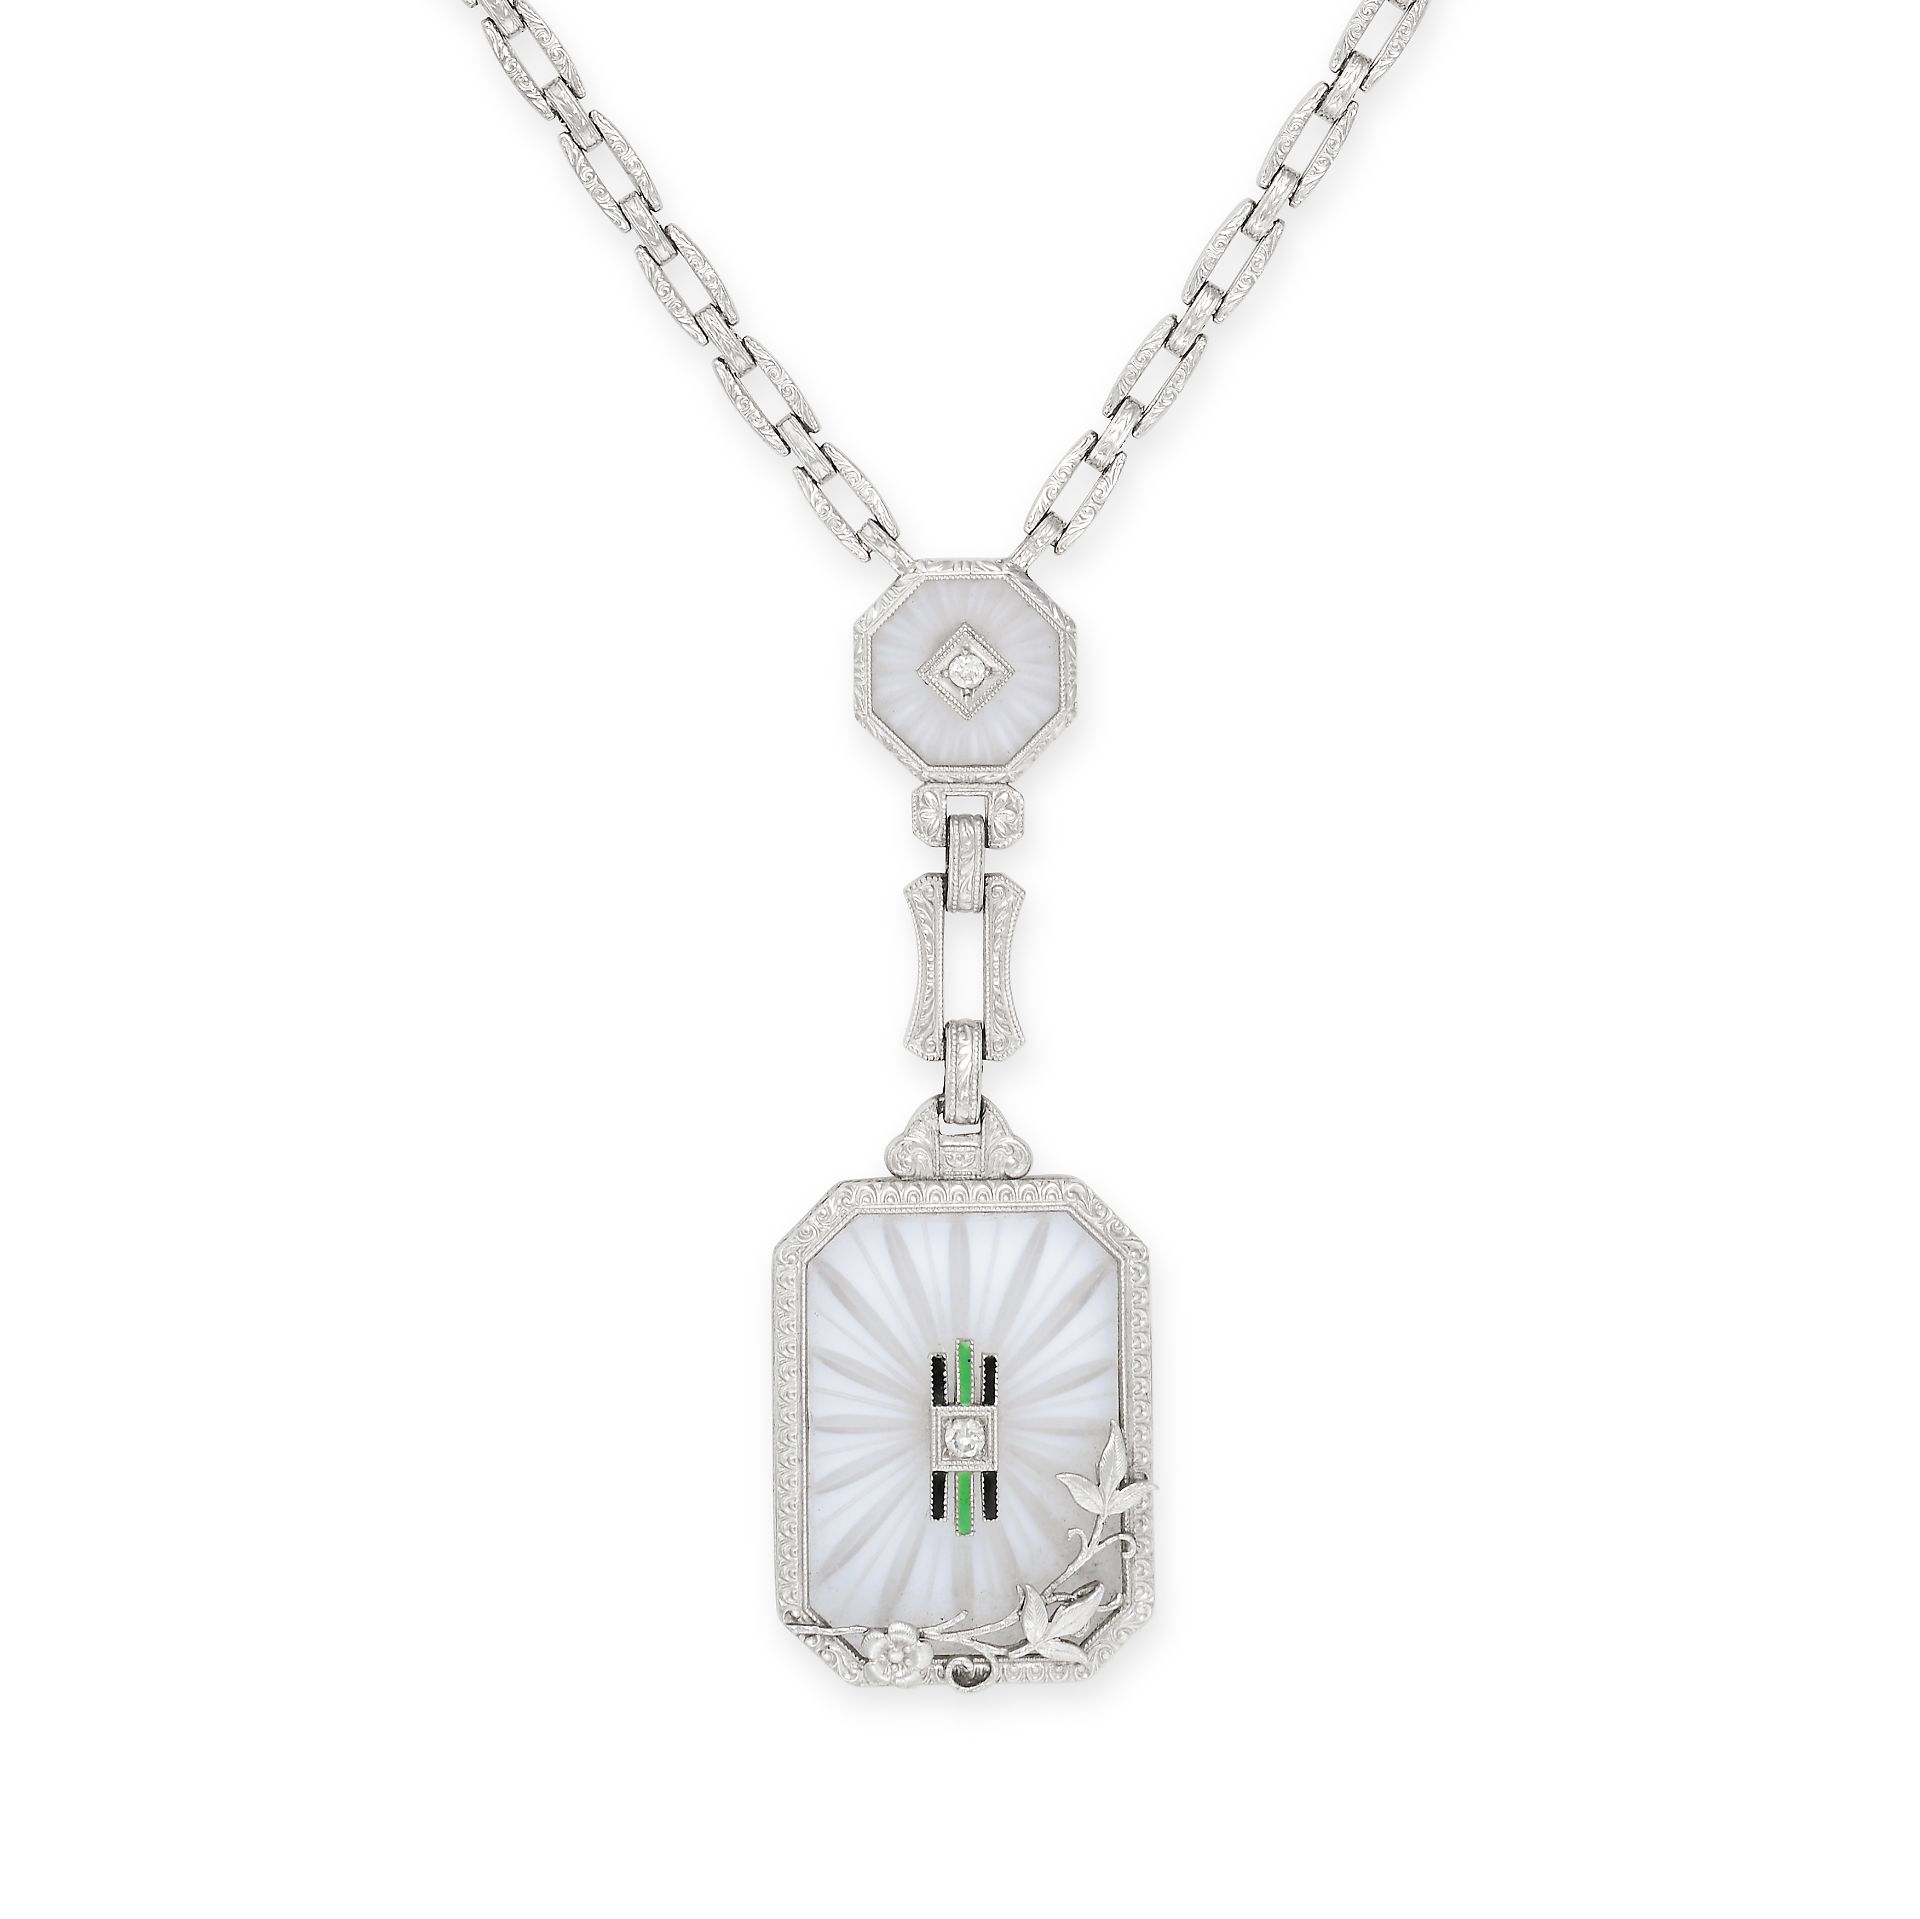 NO RESERVE - A ROCK CRYSTAL, DIAMOND AND ENAMEL PENDANT NECKLACE comprising a frosted rock crysta...